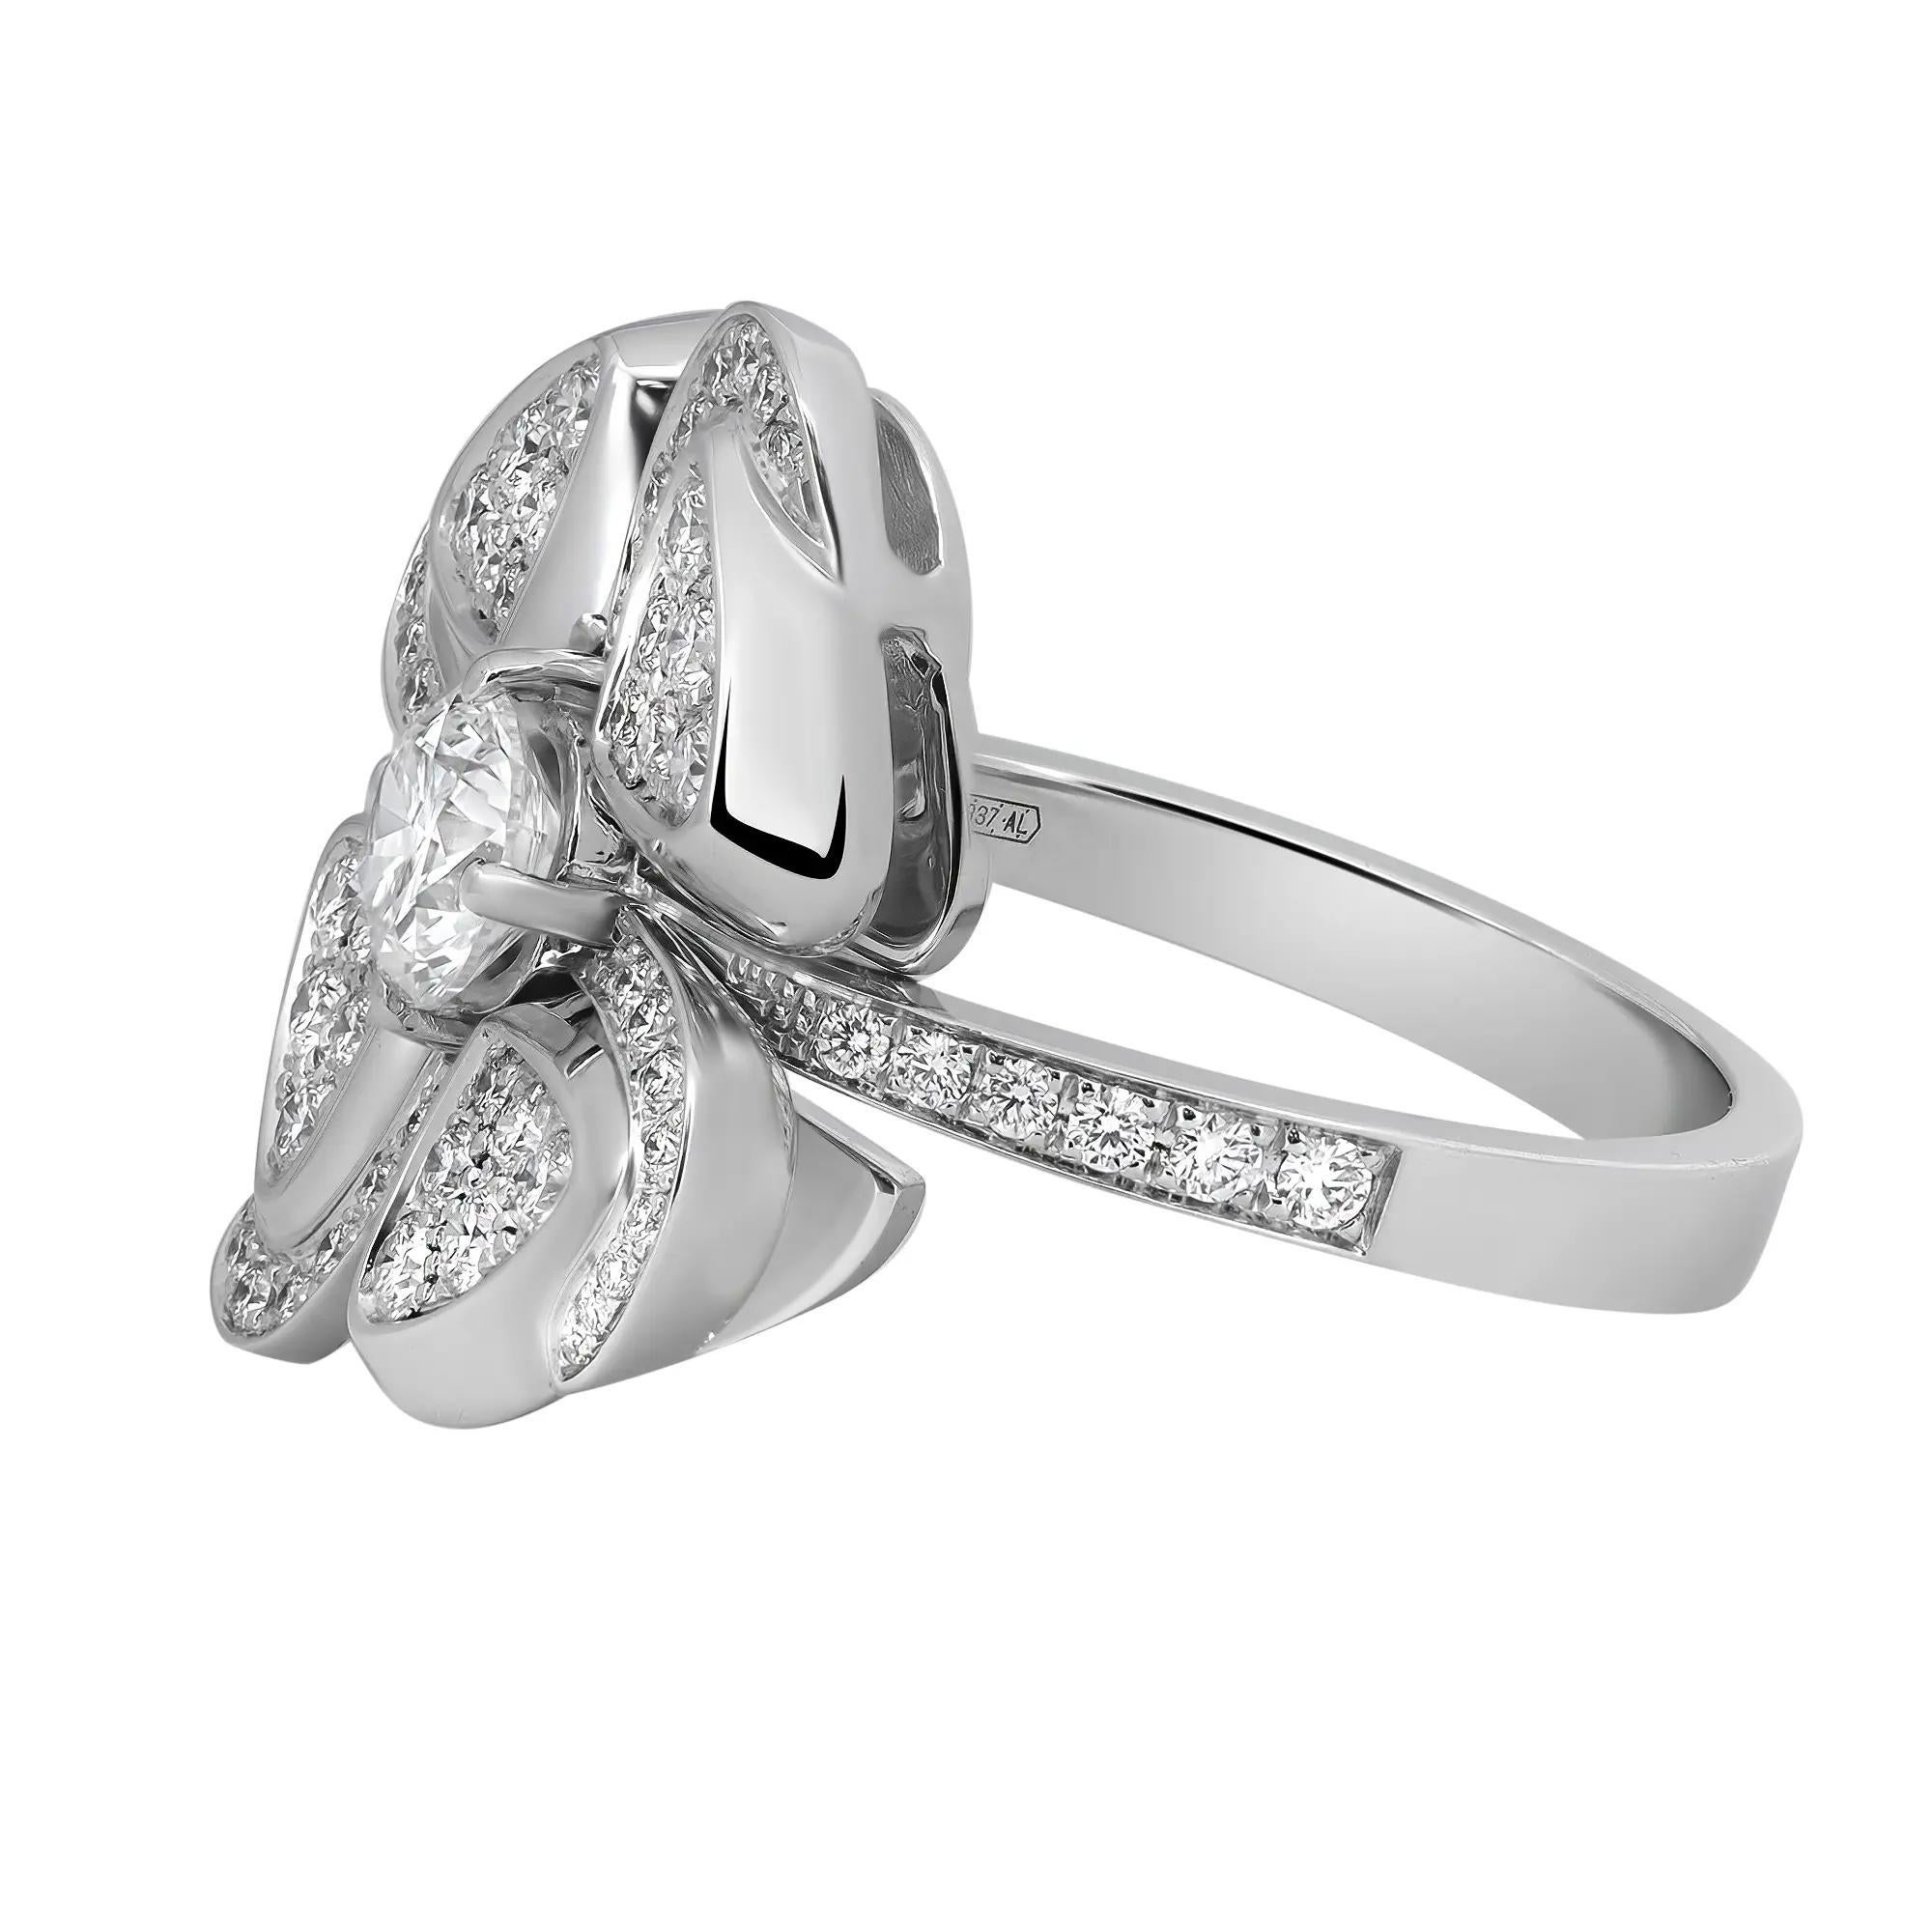 Fall in love with this beautiful Blvgari Fiorever diamond ring. Crafted in lustrous 18K white gold. It features a center prong set round brilliant cut diamond embraced with Bvlgari’s precious floral icon sparkling eternally with four white gold and